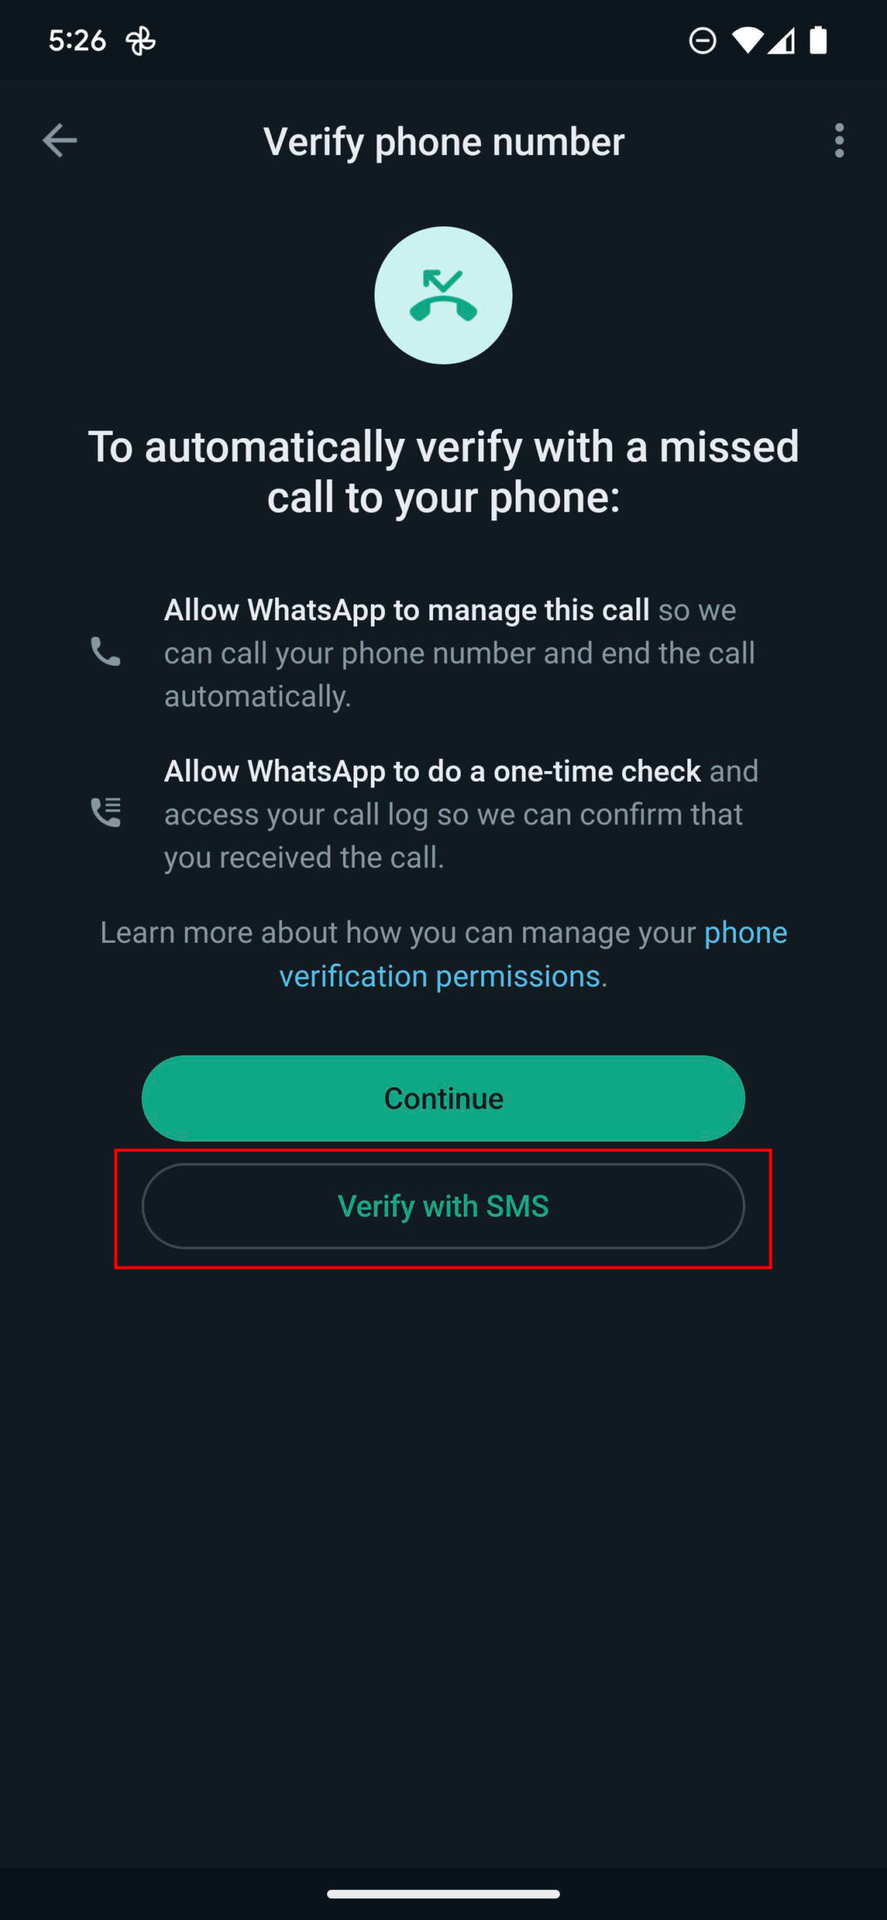 How to use WhatsApp without a SIM using a landline 5